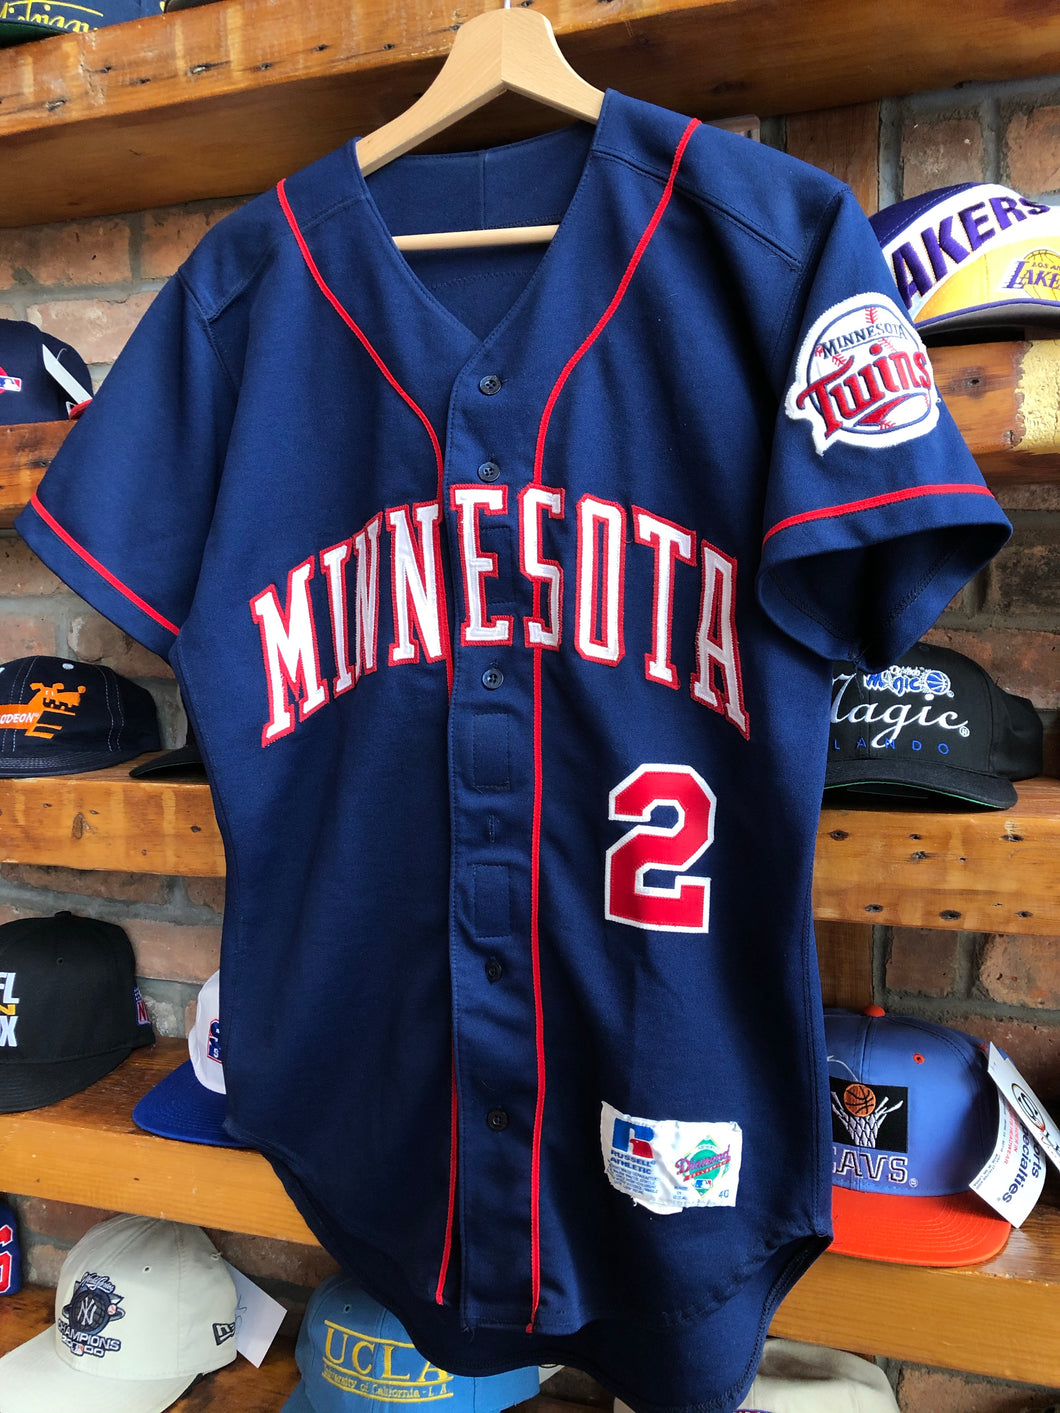 twins authentic jersey